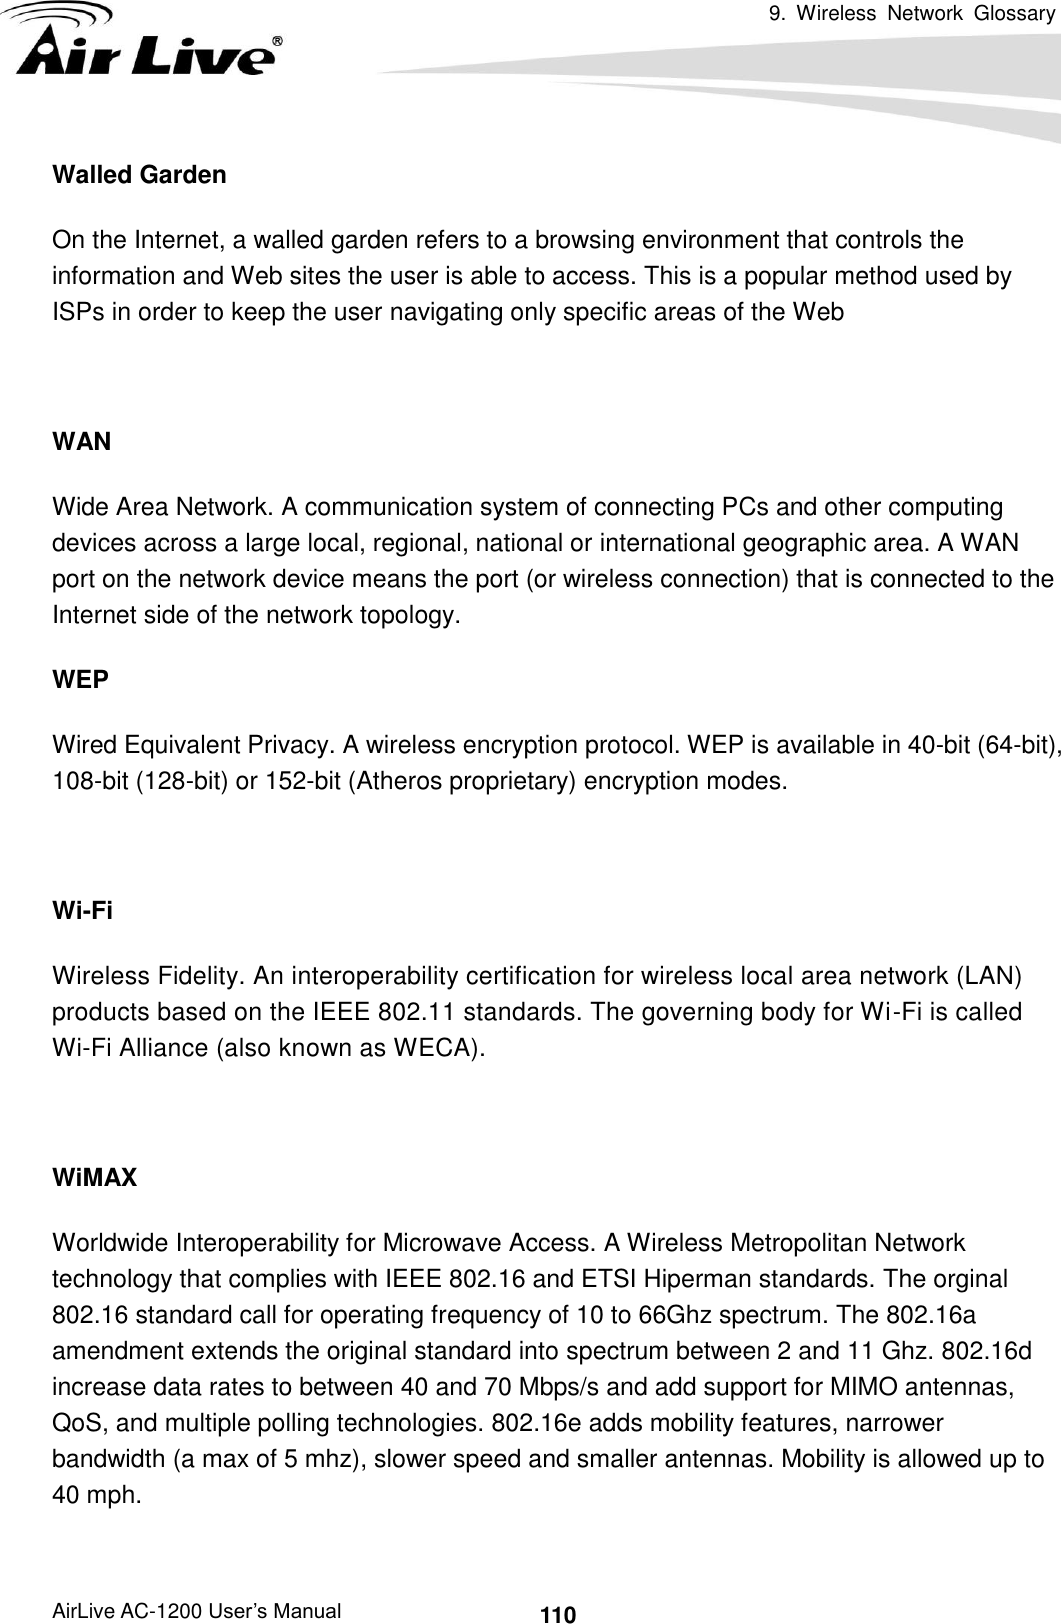 9.  Wireless  Network  Glossary      AirLive AC-1200 User’s Manual 110 Walled Garden On the Internet, a walled garden refers to a browsing environment that controls the information and Web sites the user is able to access. This is a popular method used by ISPs in order to keep the user navigating only specific areas of the Web  WAN Wide Area Network. A communication system of connecting PCs and other computing devices across a large local, regional, national or international geographic area. A WAN port on the network device means the port (or wireless connection) that is connected to the Internet side of the network topology. WEP   Wired Equivalent Privacy. A wireless encryption protocol. WEP is available in 40-bit (64-bit),   108-bit (128-bit) or 152-bit (Atheros proprietary) encryption modes.    Wi-Fi   Wireless Fidelity. An interoperability certification for wireless local area network (LAN) products based on the IEEE 802.11 standards. The governing body for Wi-Fi is called Wi-Fi Alliance (also known as WECA).  WiMAX Worldwide Interoperability for Microwave Access. A Wireless Metropolitan Network technology that complies with IEEE 802.16 and ETSI Hiperman standards. The orginal 802.16 standard call for operating frequency of 10 to 66Ghz spectrum. The 802.16a amendment extends the original standard into spectrum between 2 and 11 Ghz. 802.16d increase data rates to between 40 and 70 Mbps/s and add support for MIMO antennas, QoS, and multiple polling technologies. 802.16e adds mobility features, narrower bandwidth (a max of 5 mhz), slower speed and smaller antennas. Mobility is allowed up to 40 mph.      